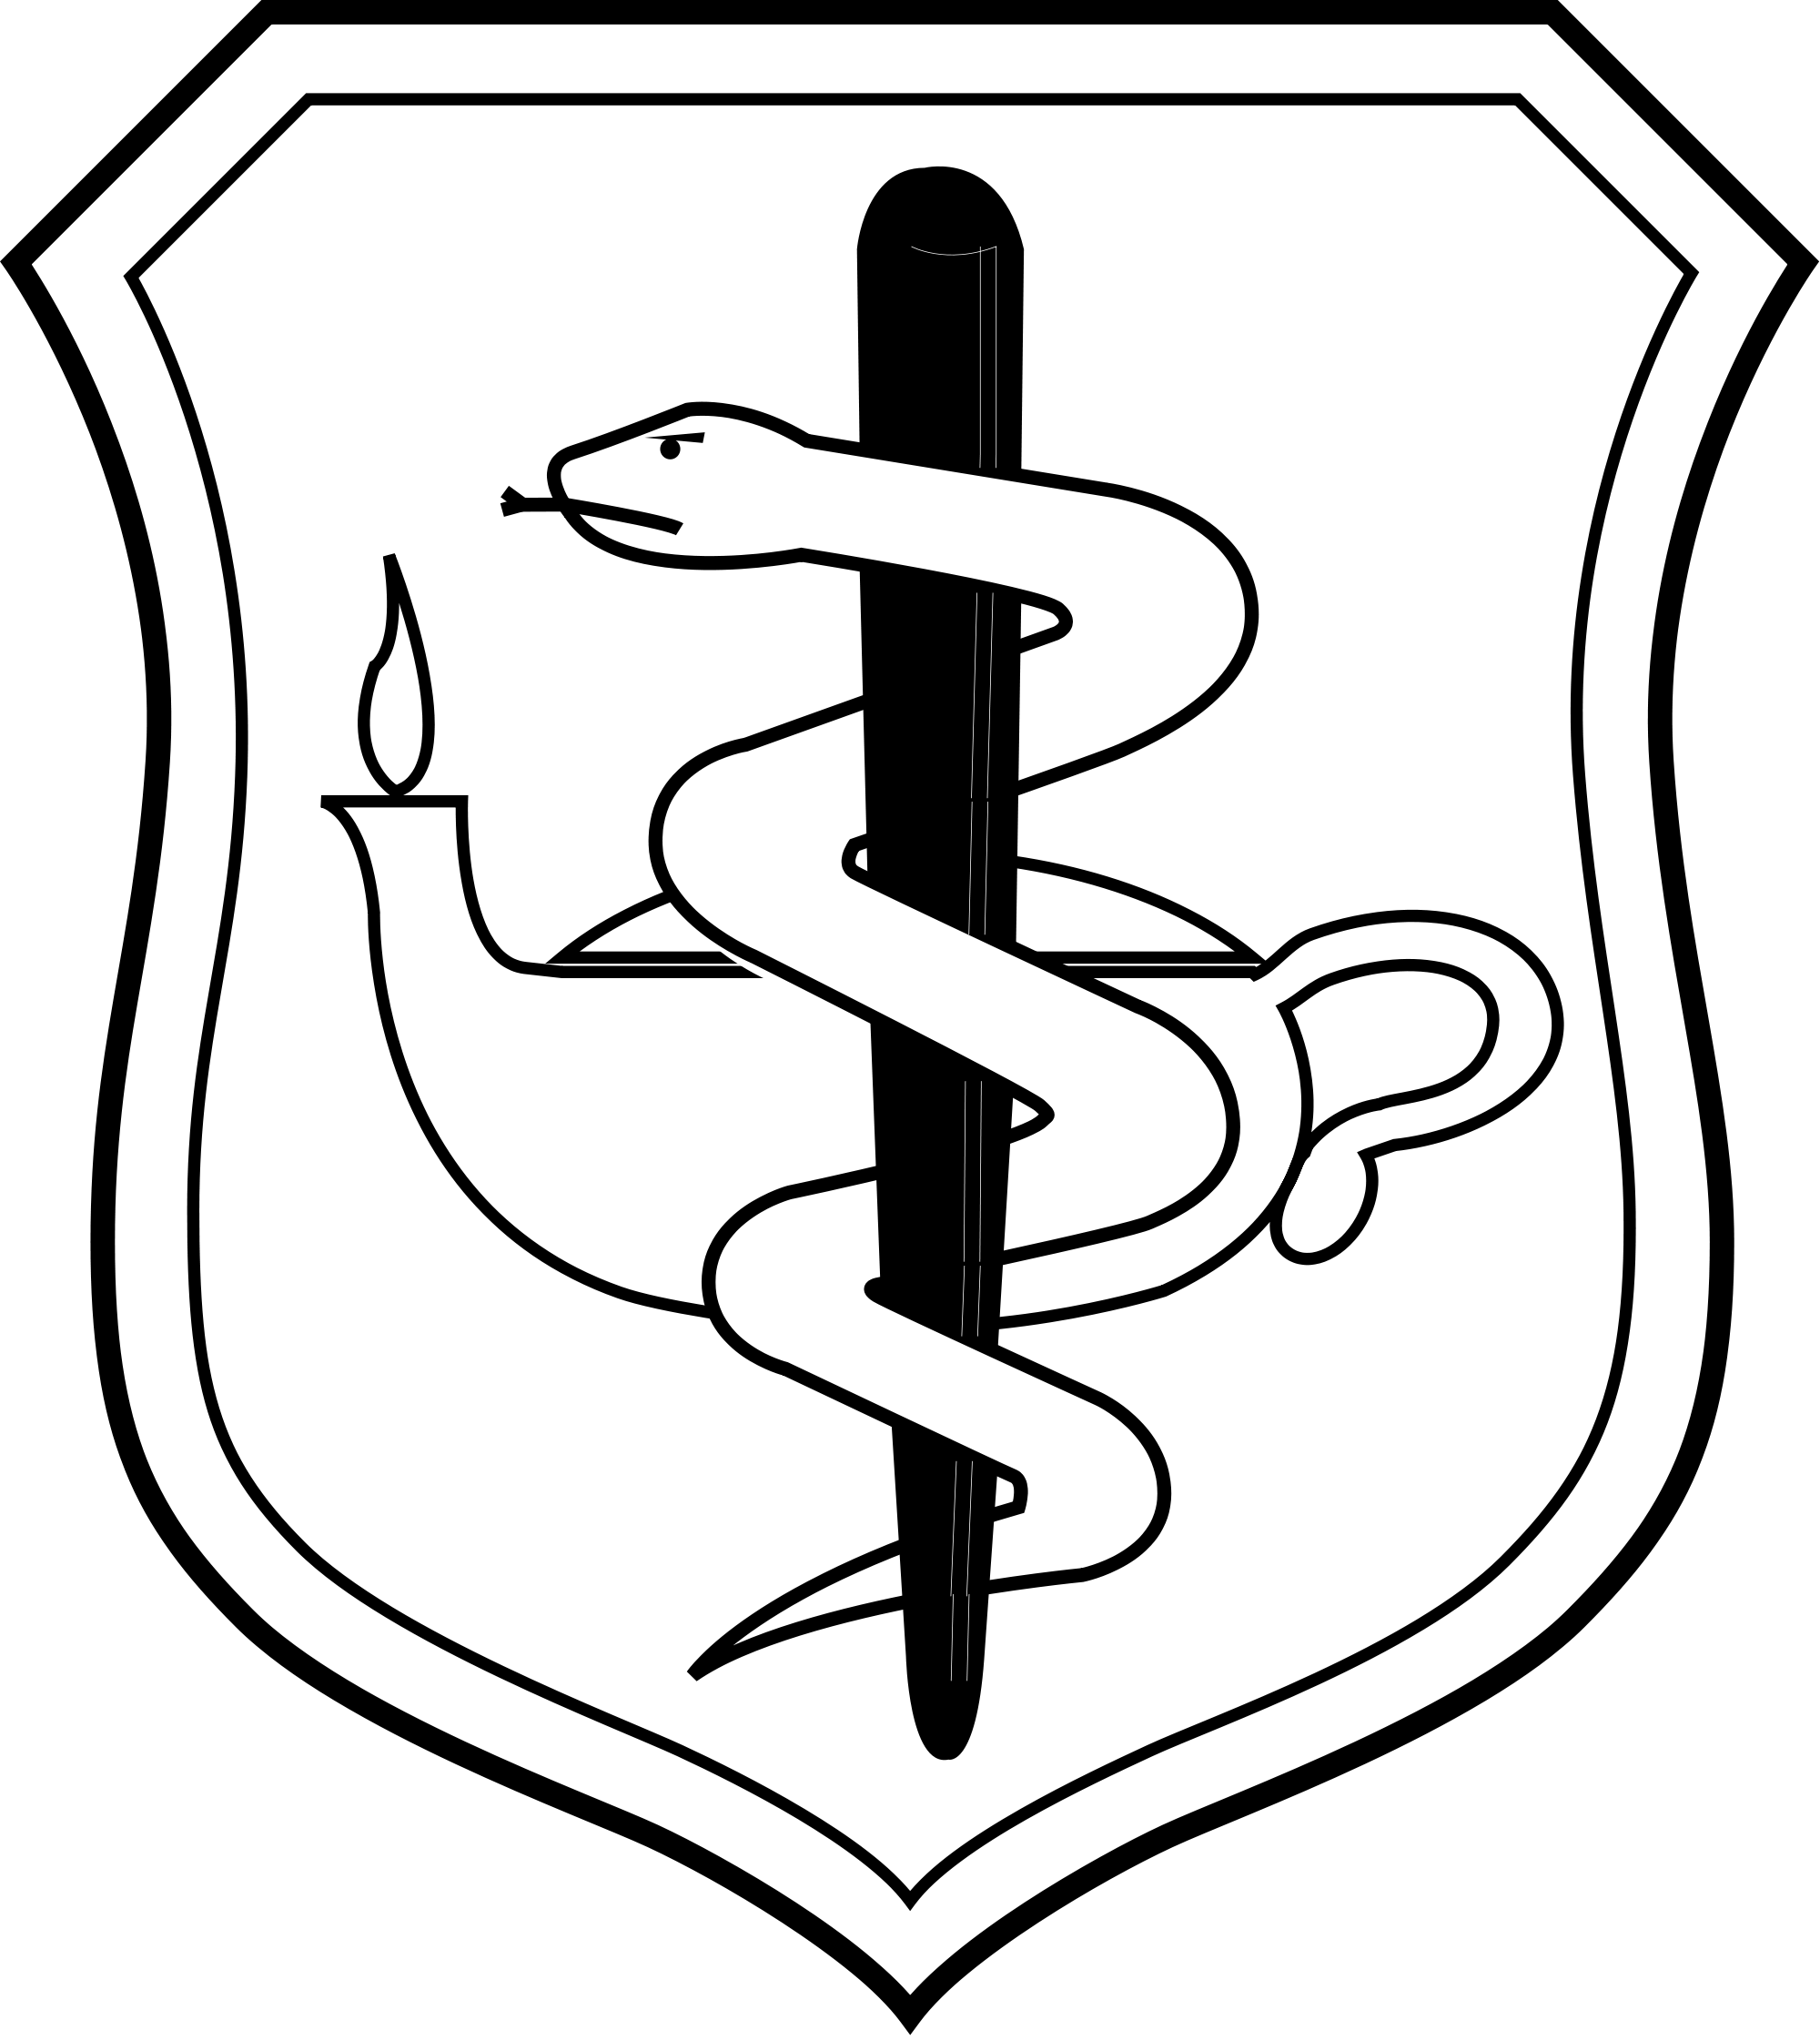 United States Air Force Nurse Corps Badge - Air Force Medical Corps (2000x2242)